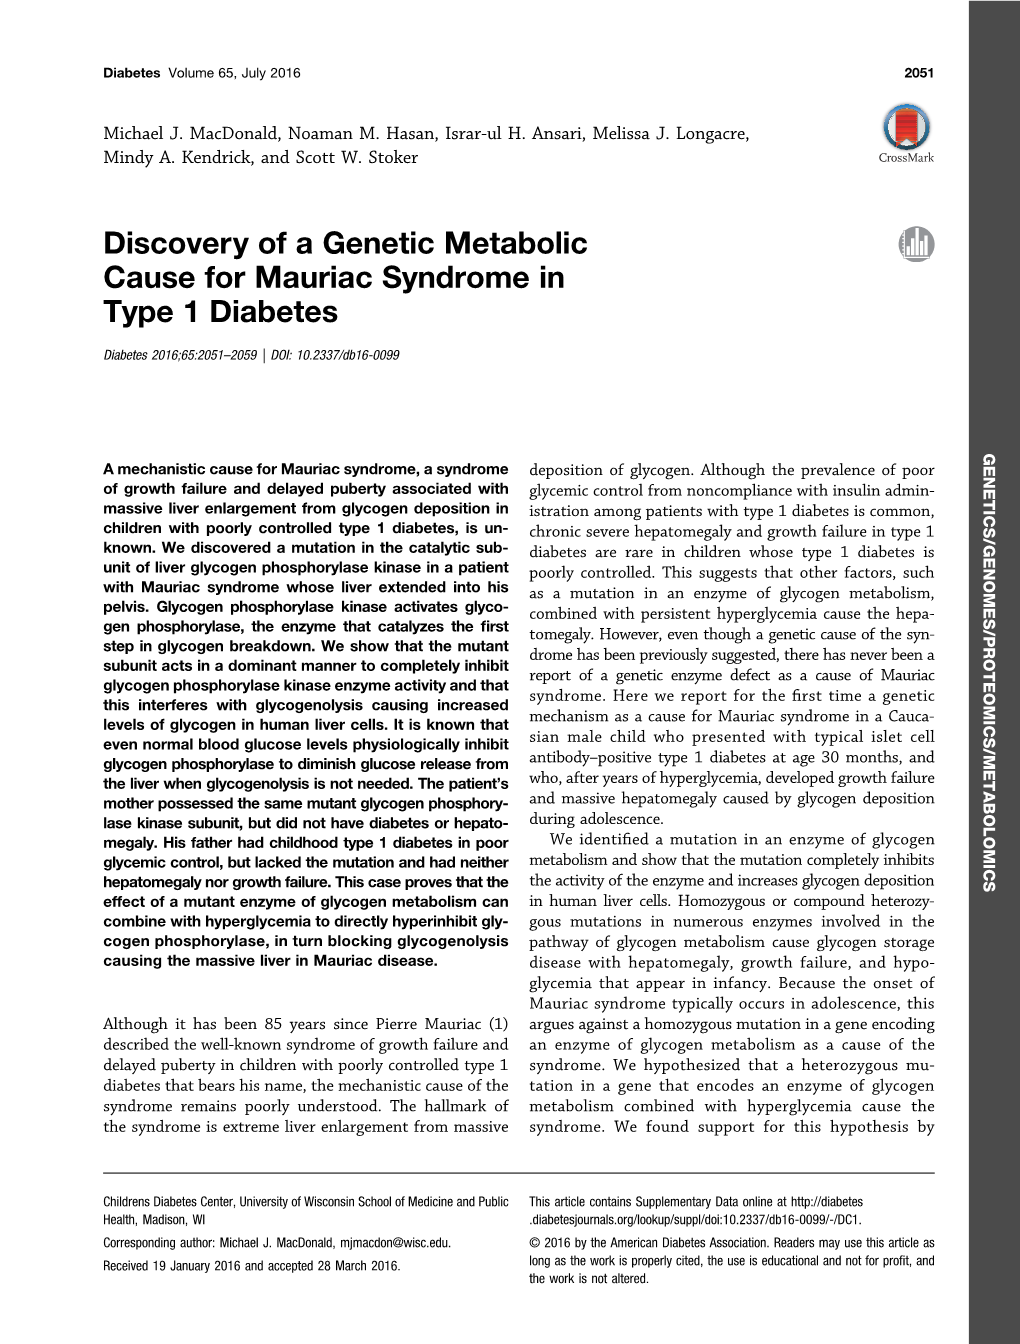 Discovery of a Genetic Metabolic Cause for Mauriac Syndrome in Type 1 Diabetes